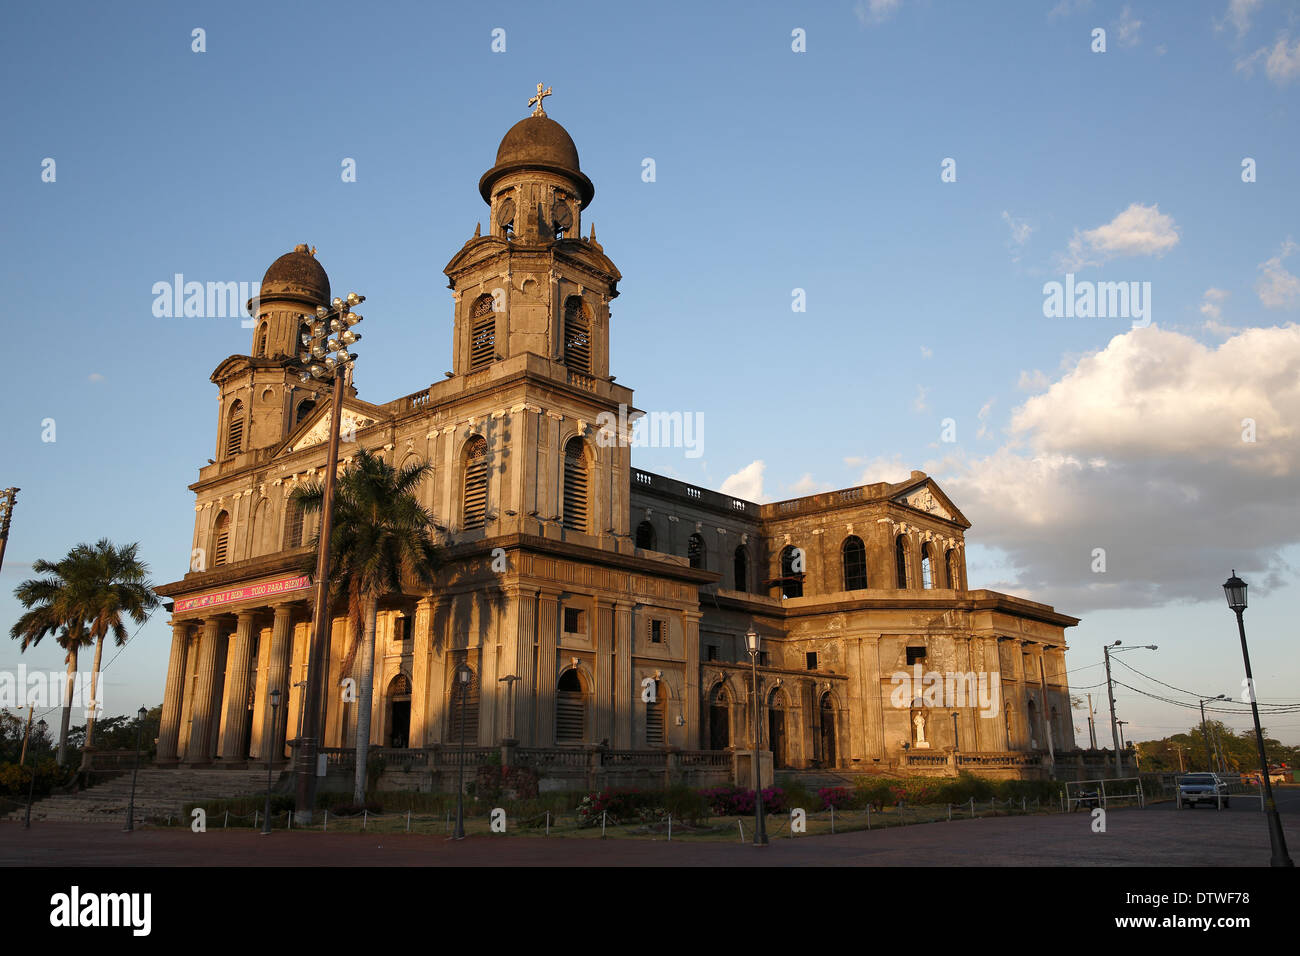 Antigua Catedral, The Old Cathedral, Managua, Nicaragua Stock Photo